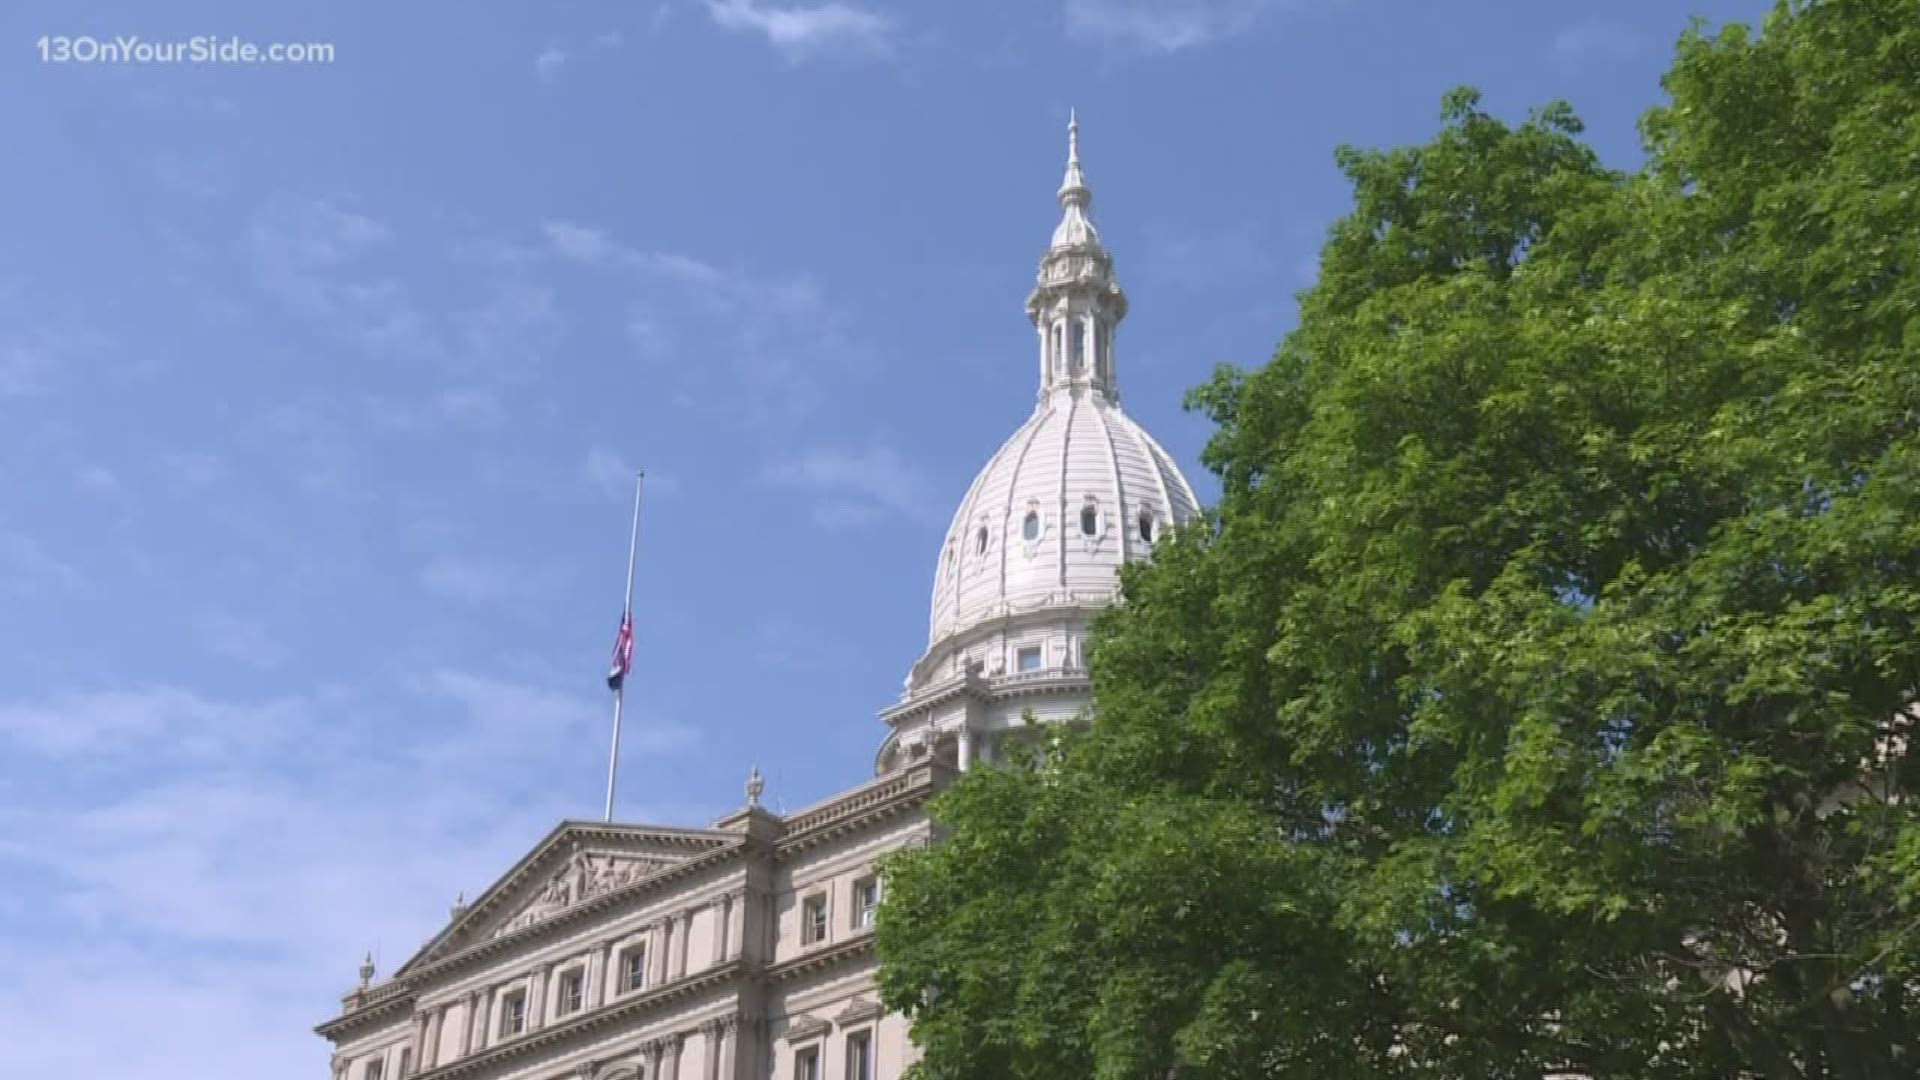 Gov. Gretchen Whitmer signed the budget with only hours left before the deadline.